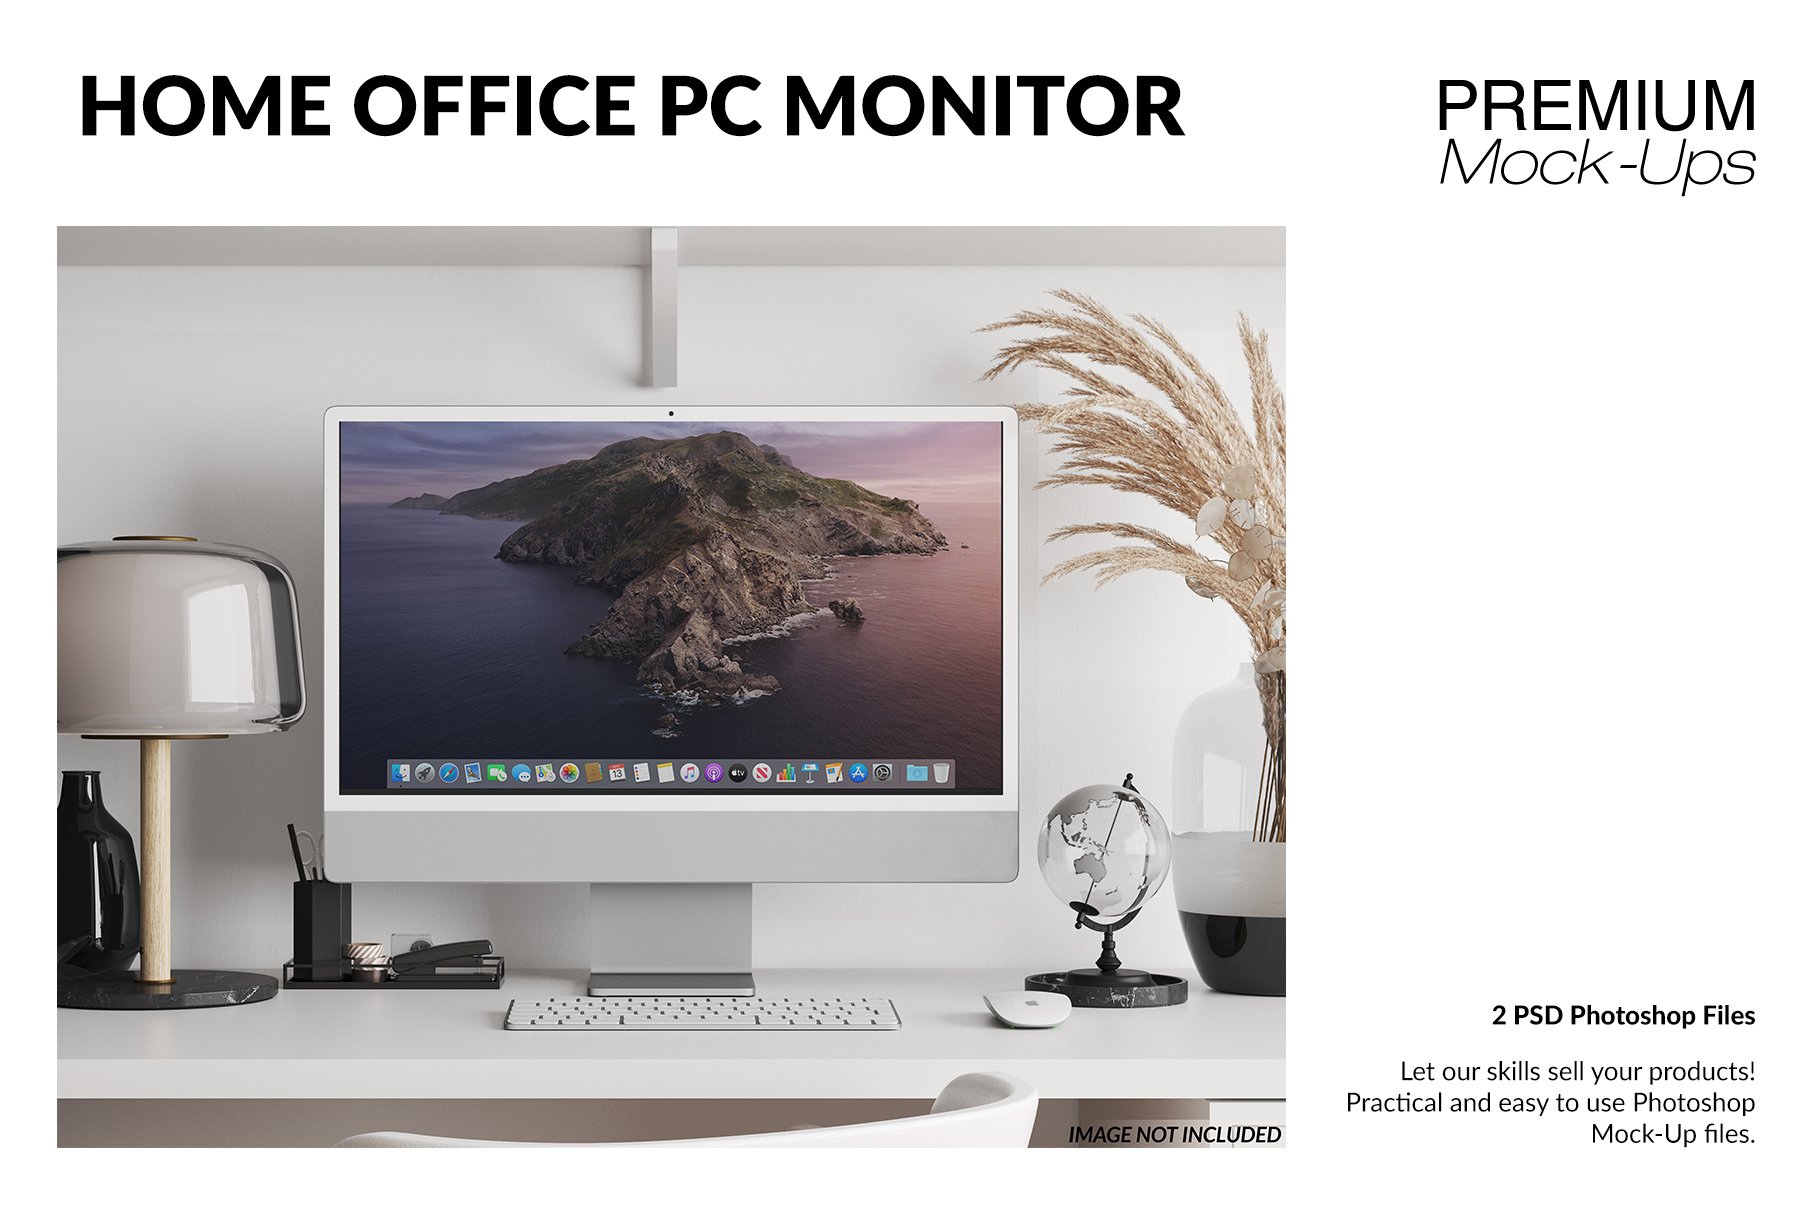 Home Office PC Monitor cover image.